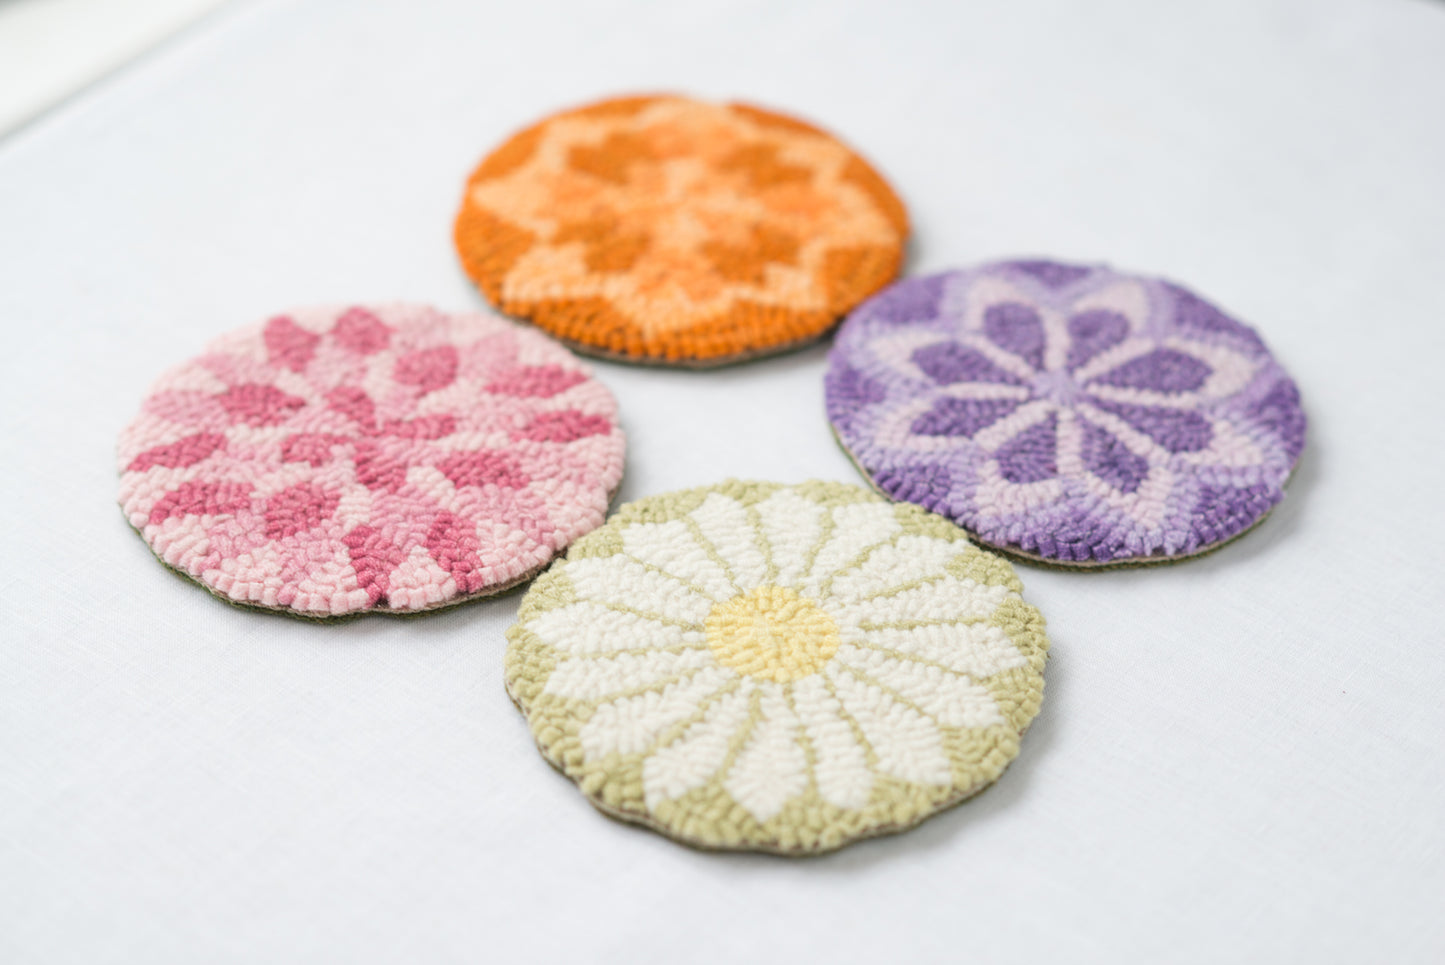 Floral Geometric coasters - 5" round, set of 4 - functional art - as seen in Making Magazine